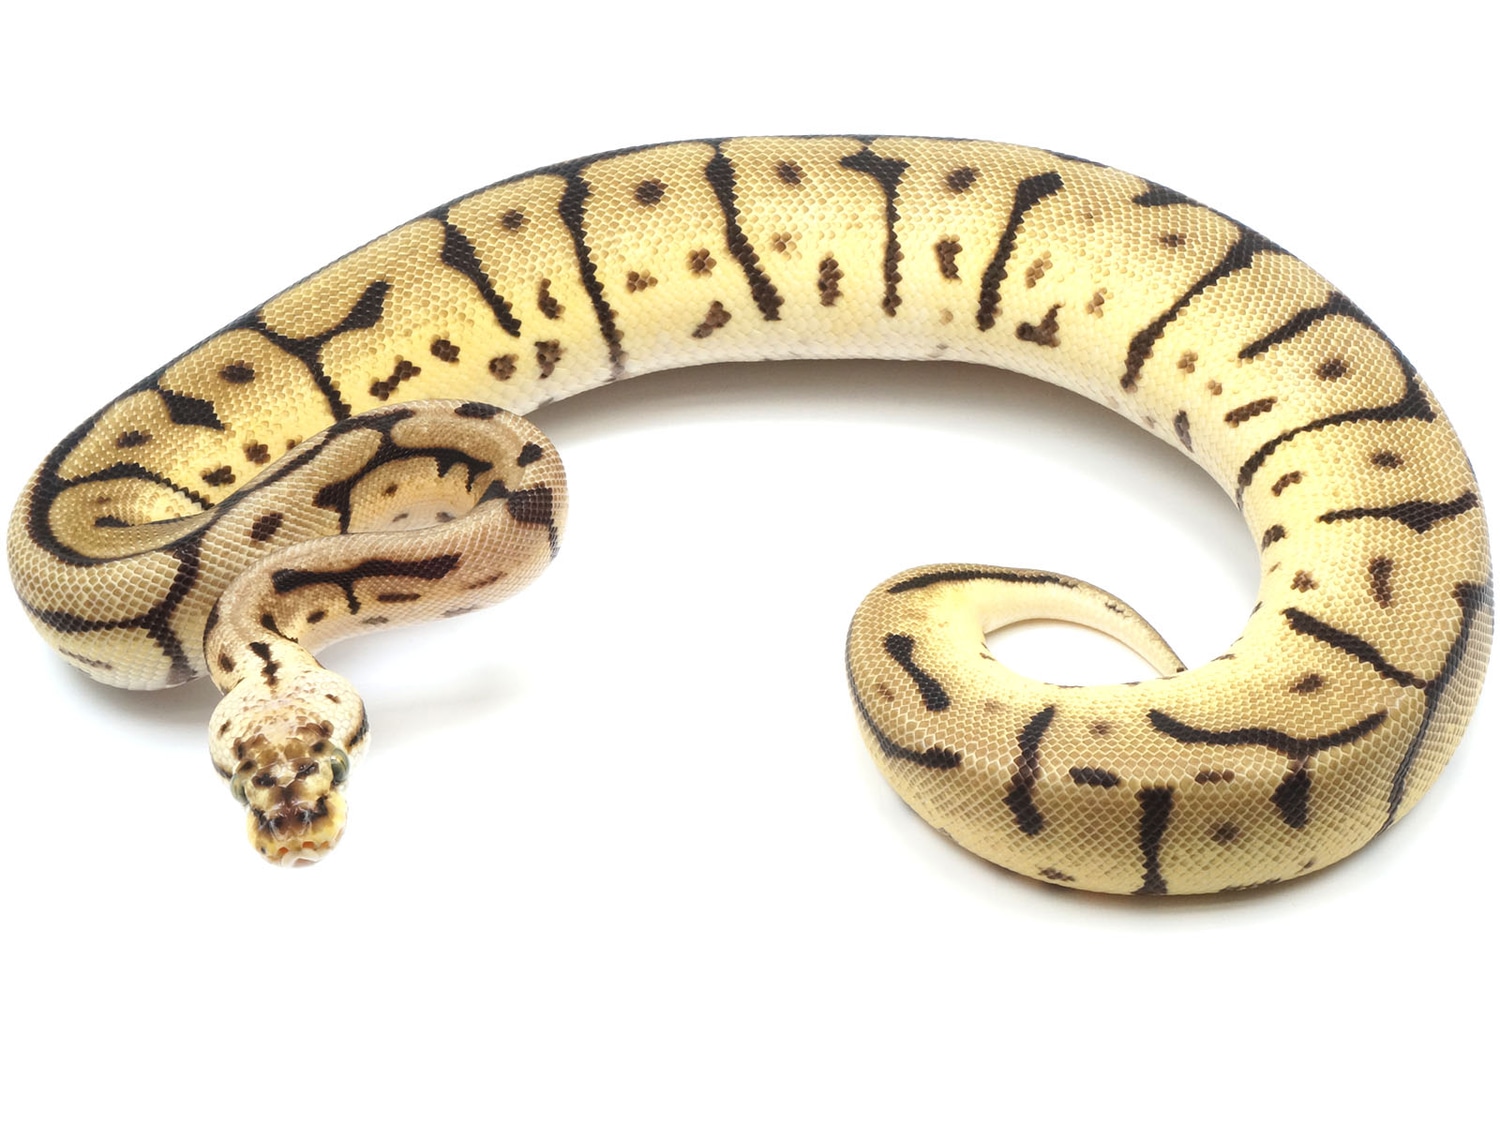 Bumble Bee Leopard EMG Ball Python by New England Reptile Distributors